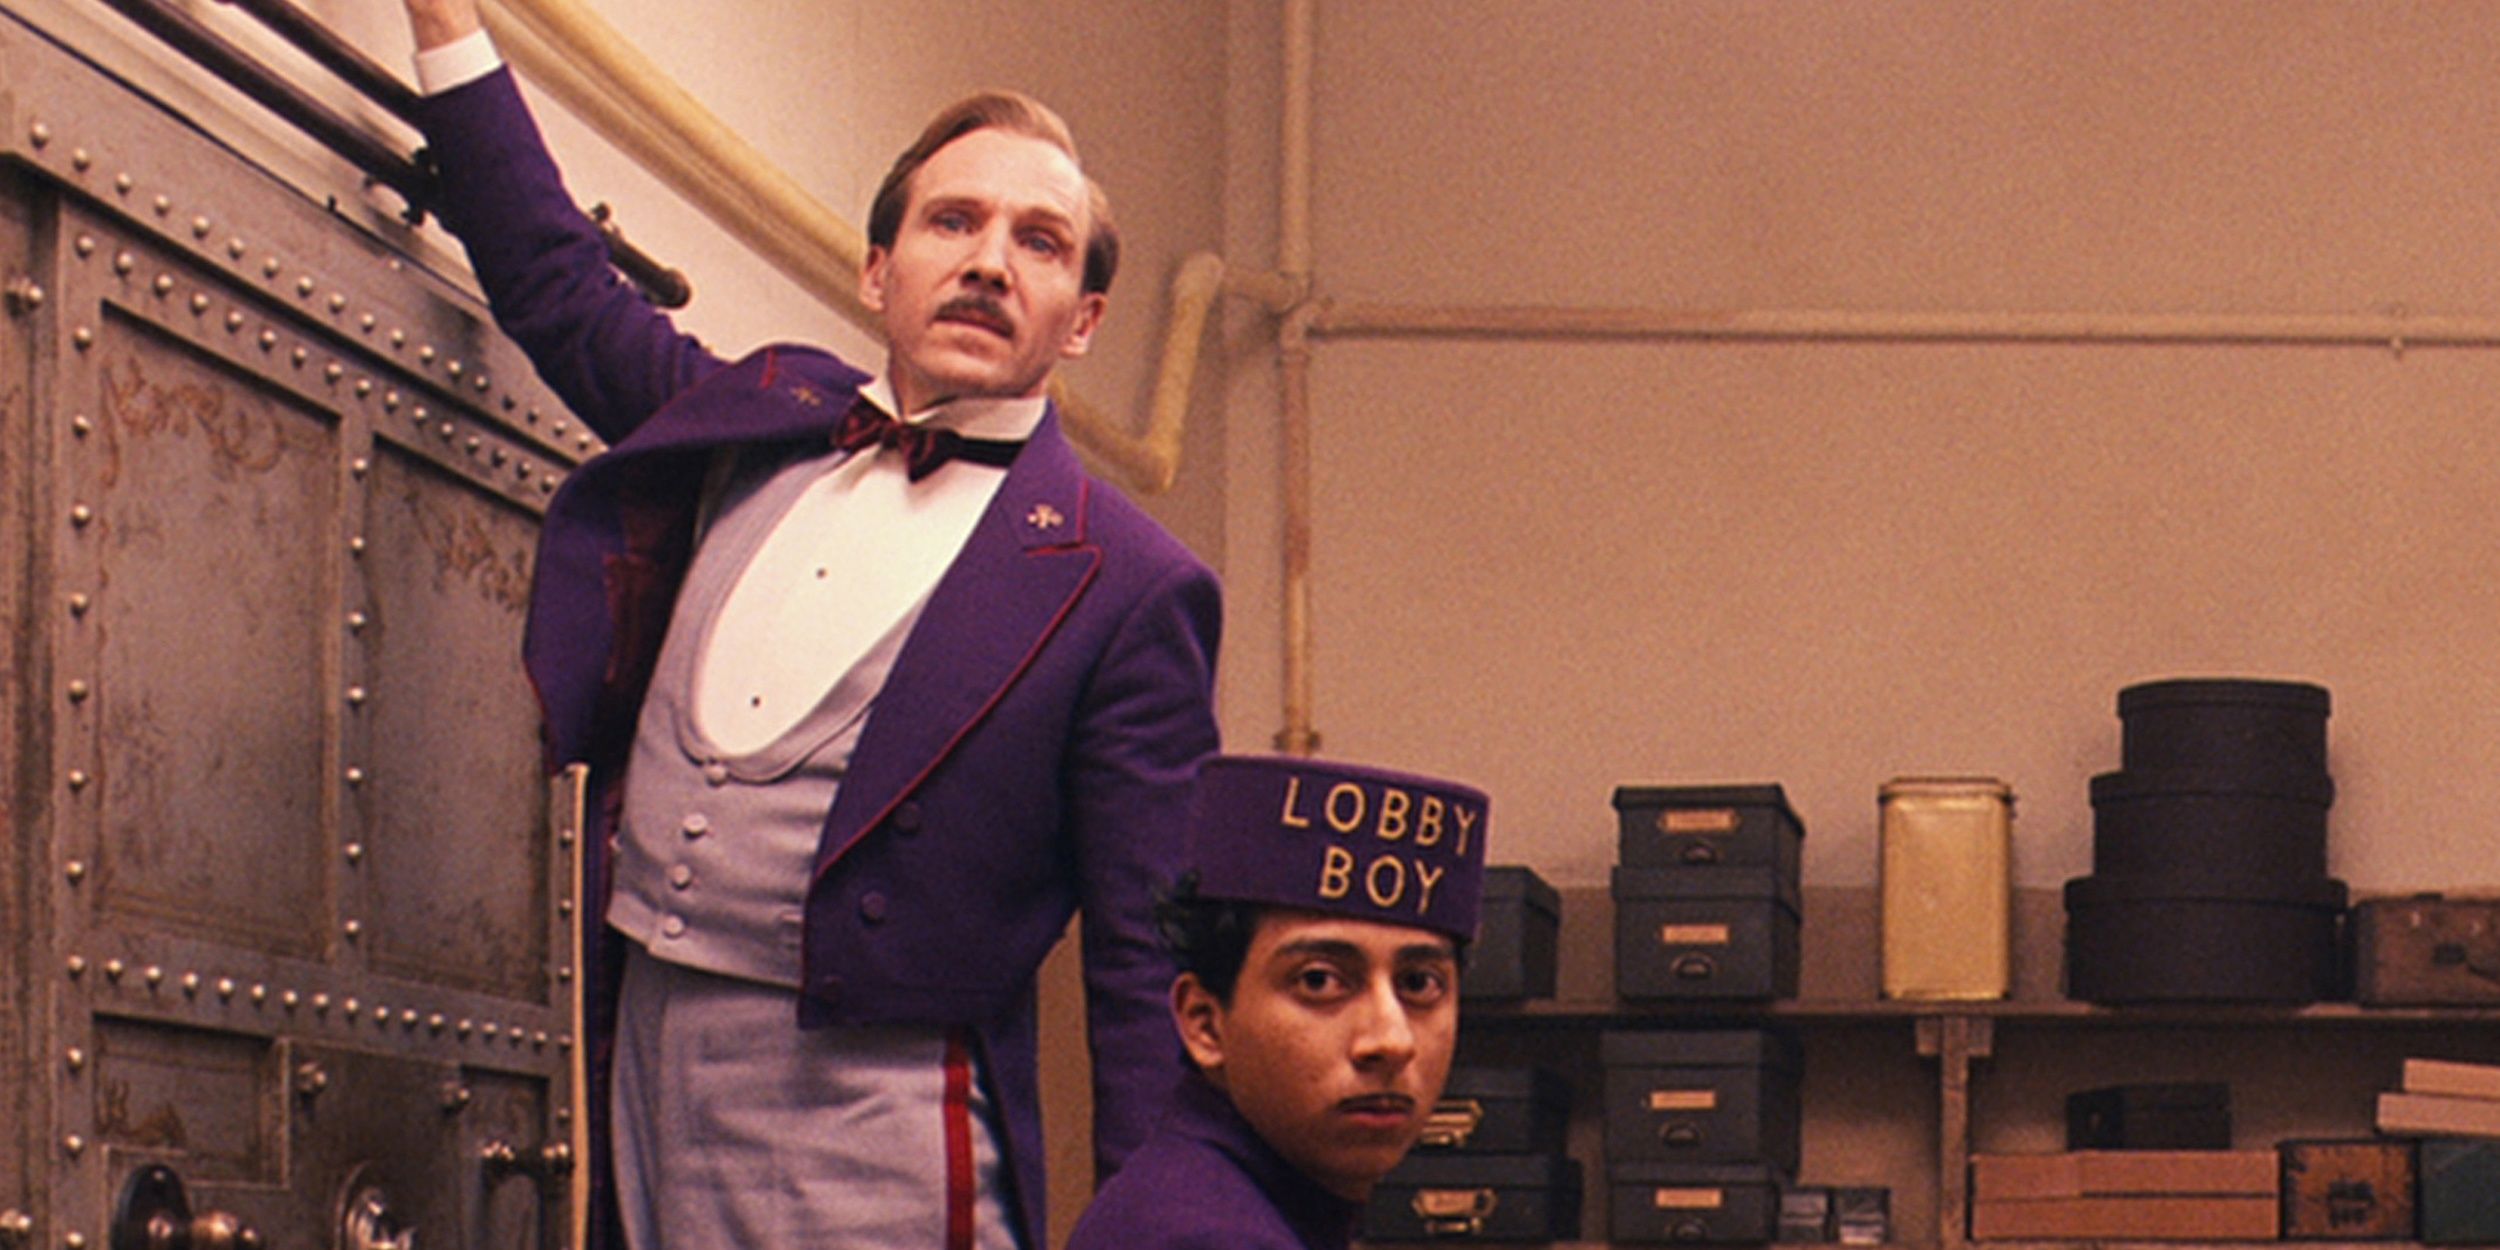 Ralph Fiennes reaches up in The Grand Budapest Hotel